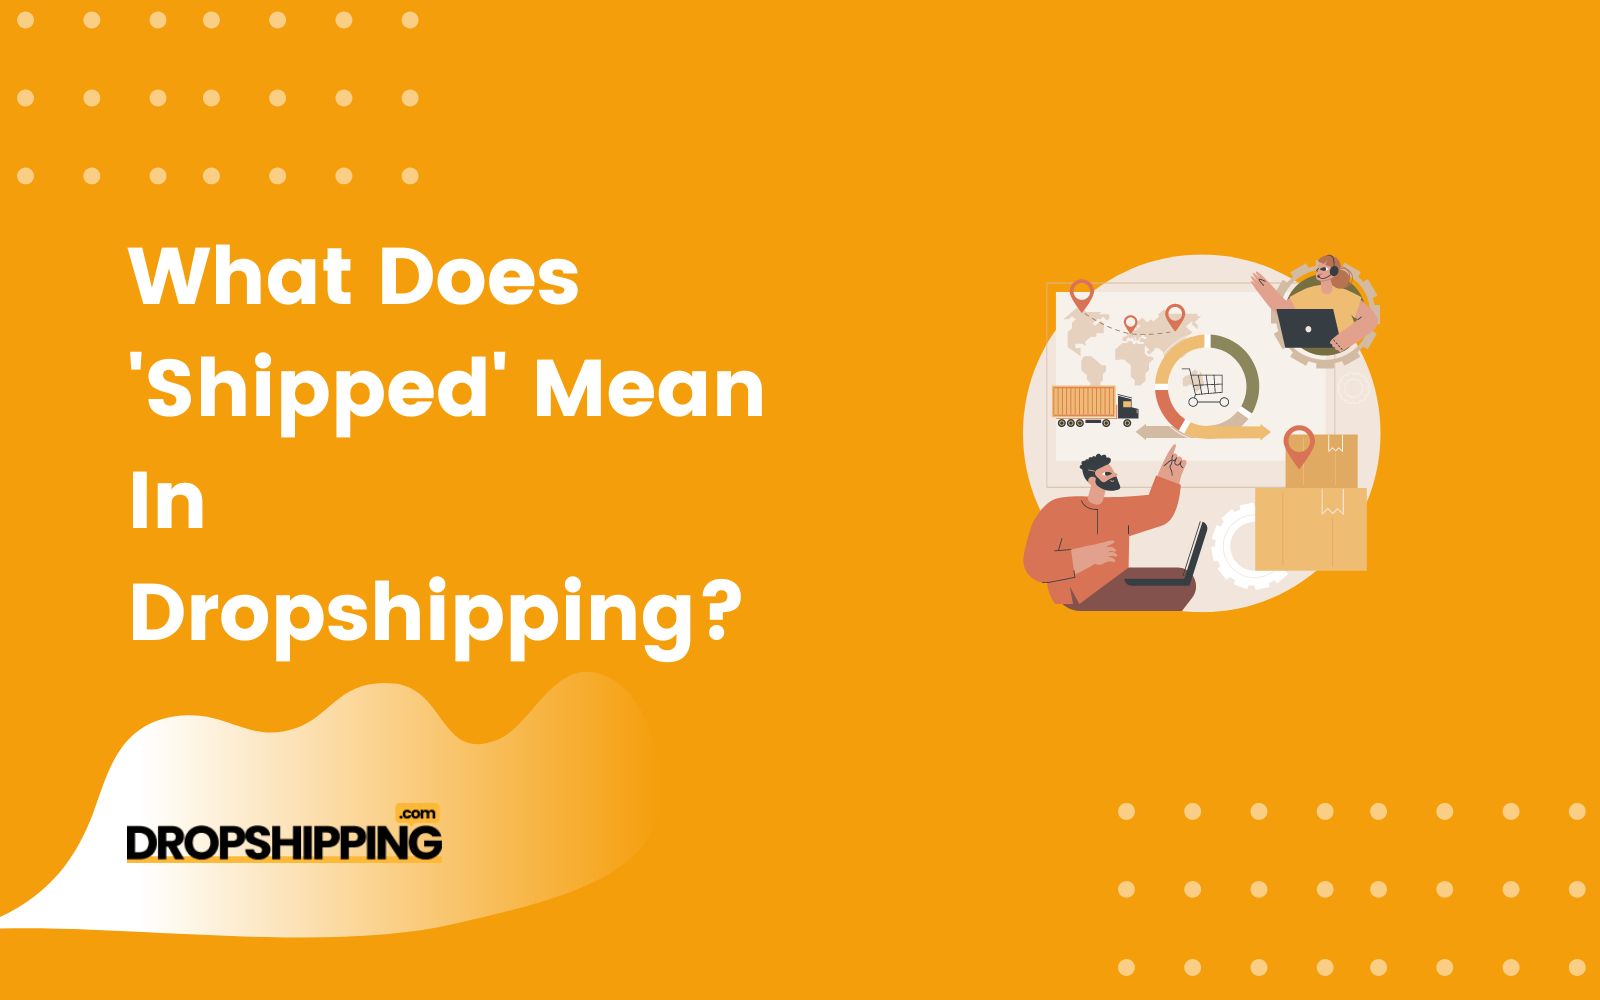 What Does Shipped Mean In Dropshipping?